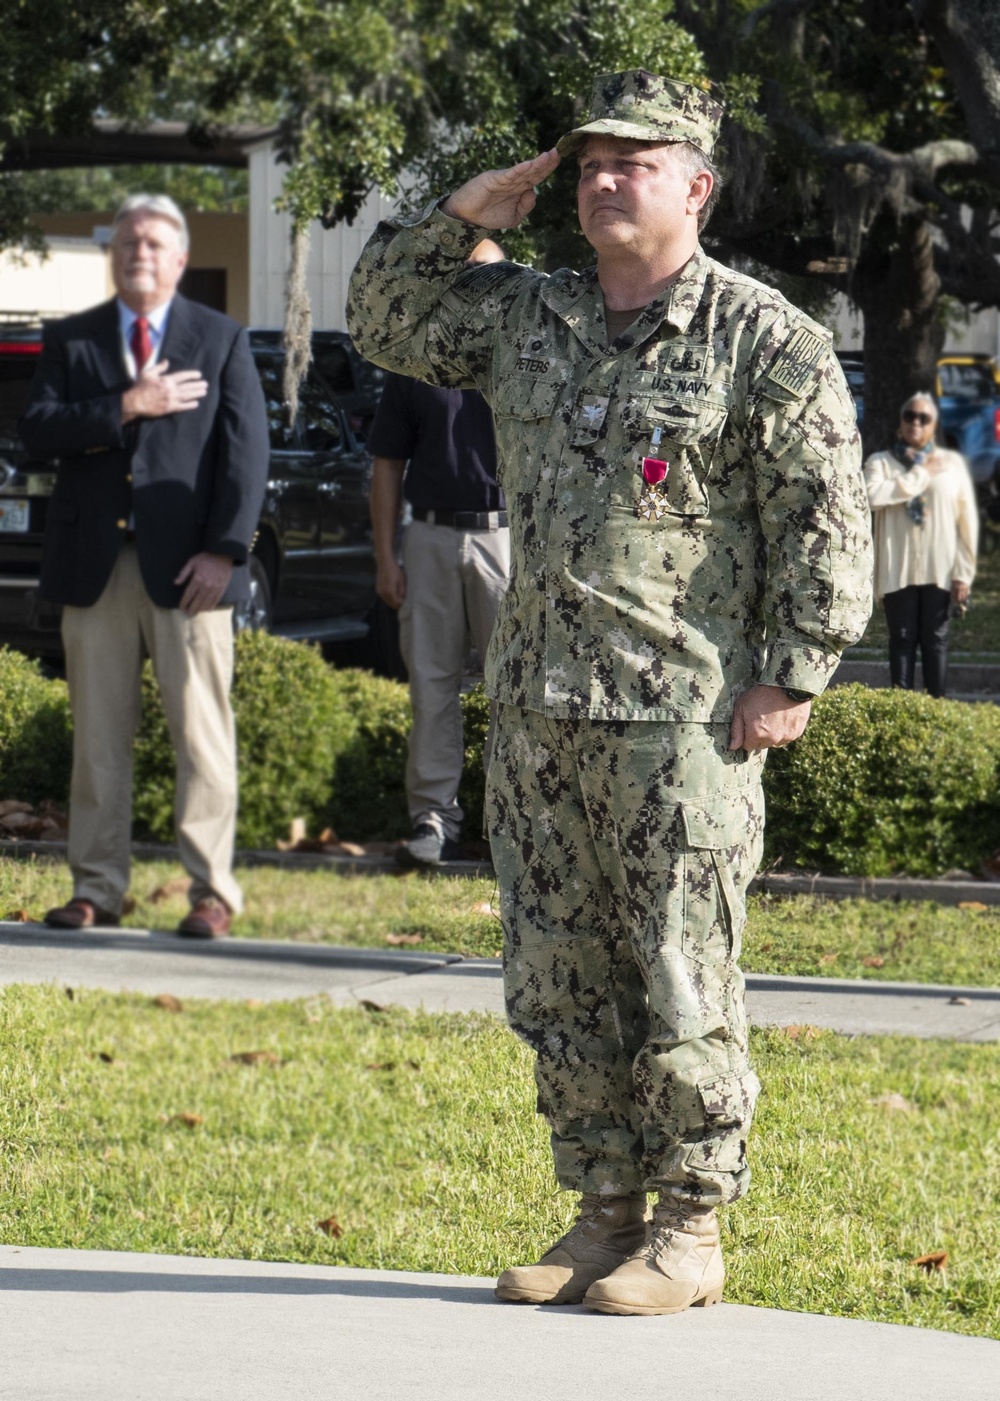 Back relieves Peters as commander of NSWC PCD